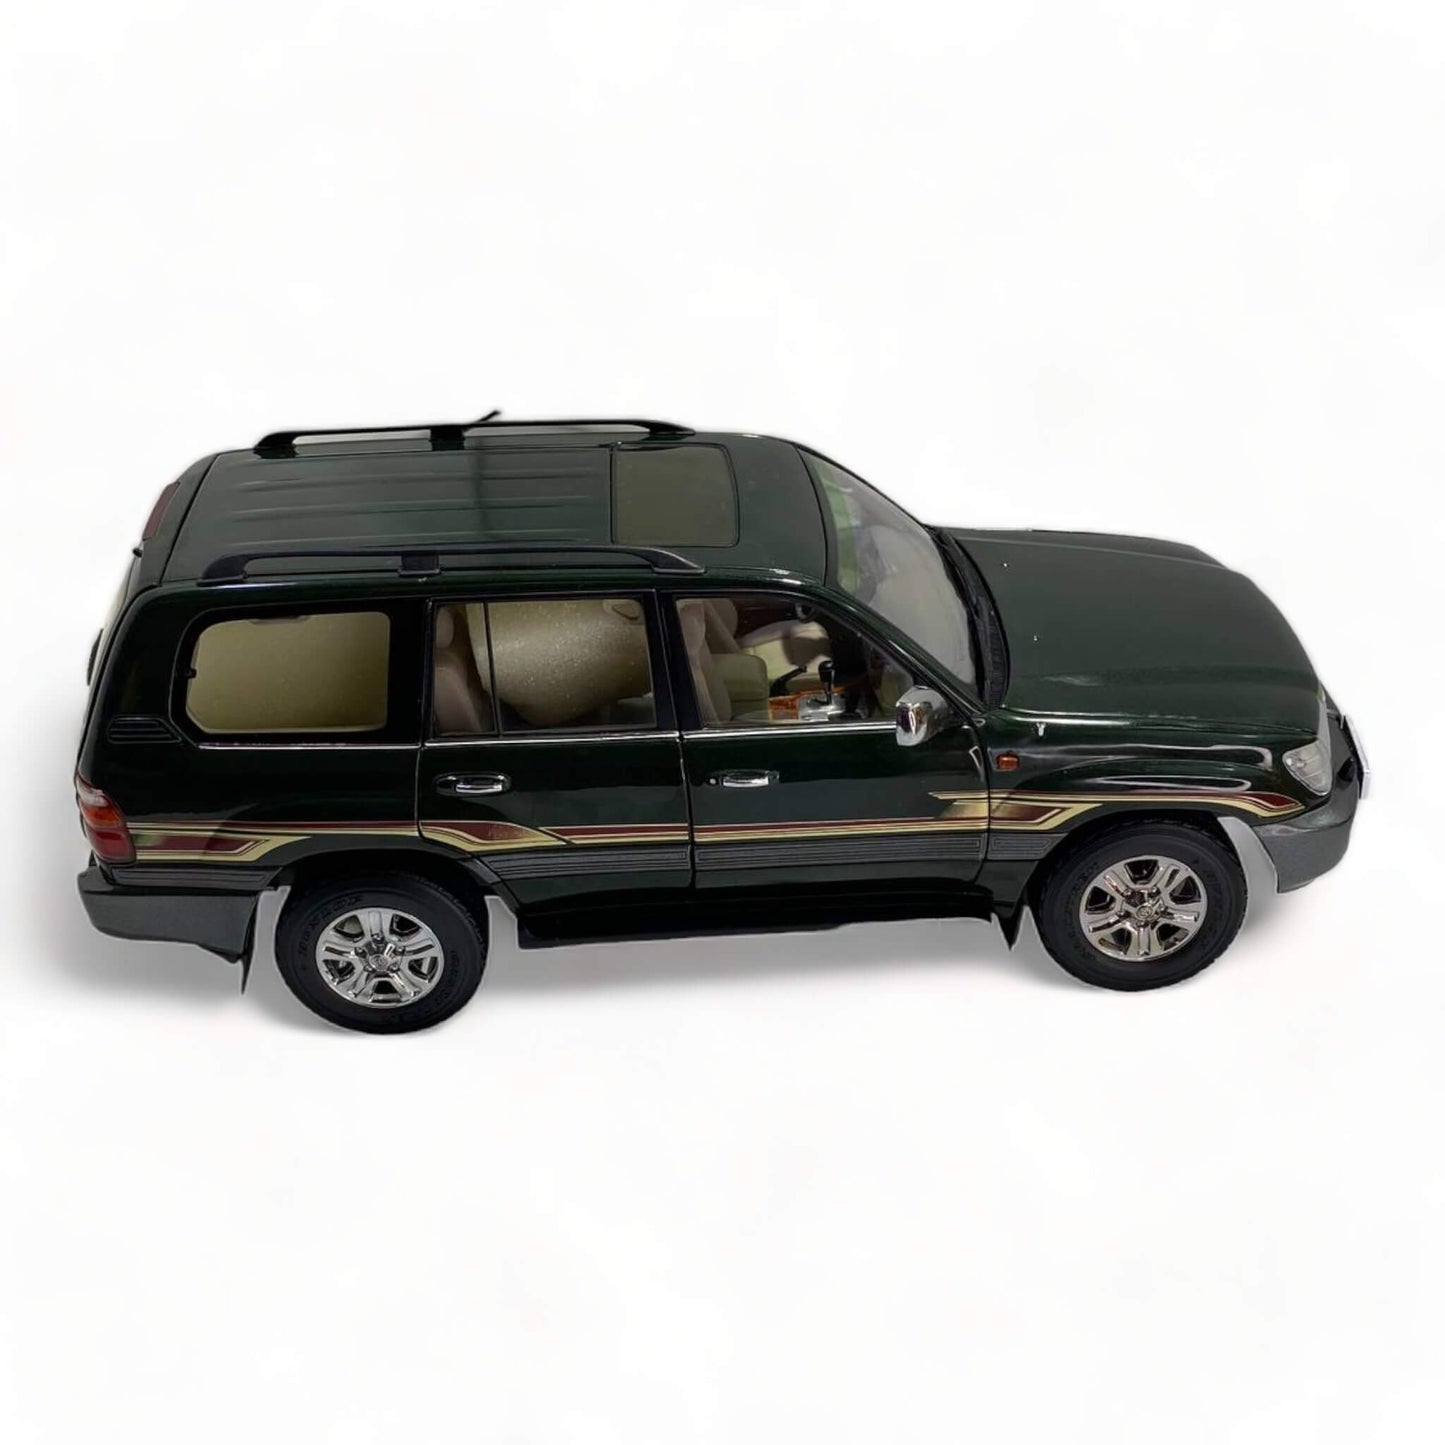 Toyota Land Cruiser 100 Green 1/18 Diecast metal car by Faw Toys